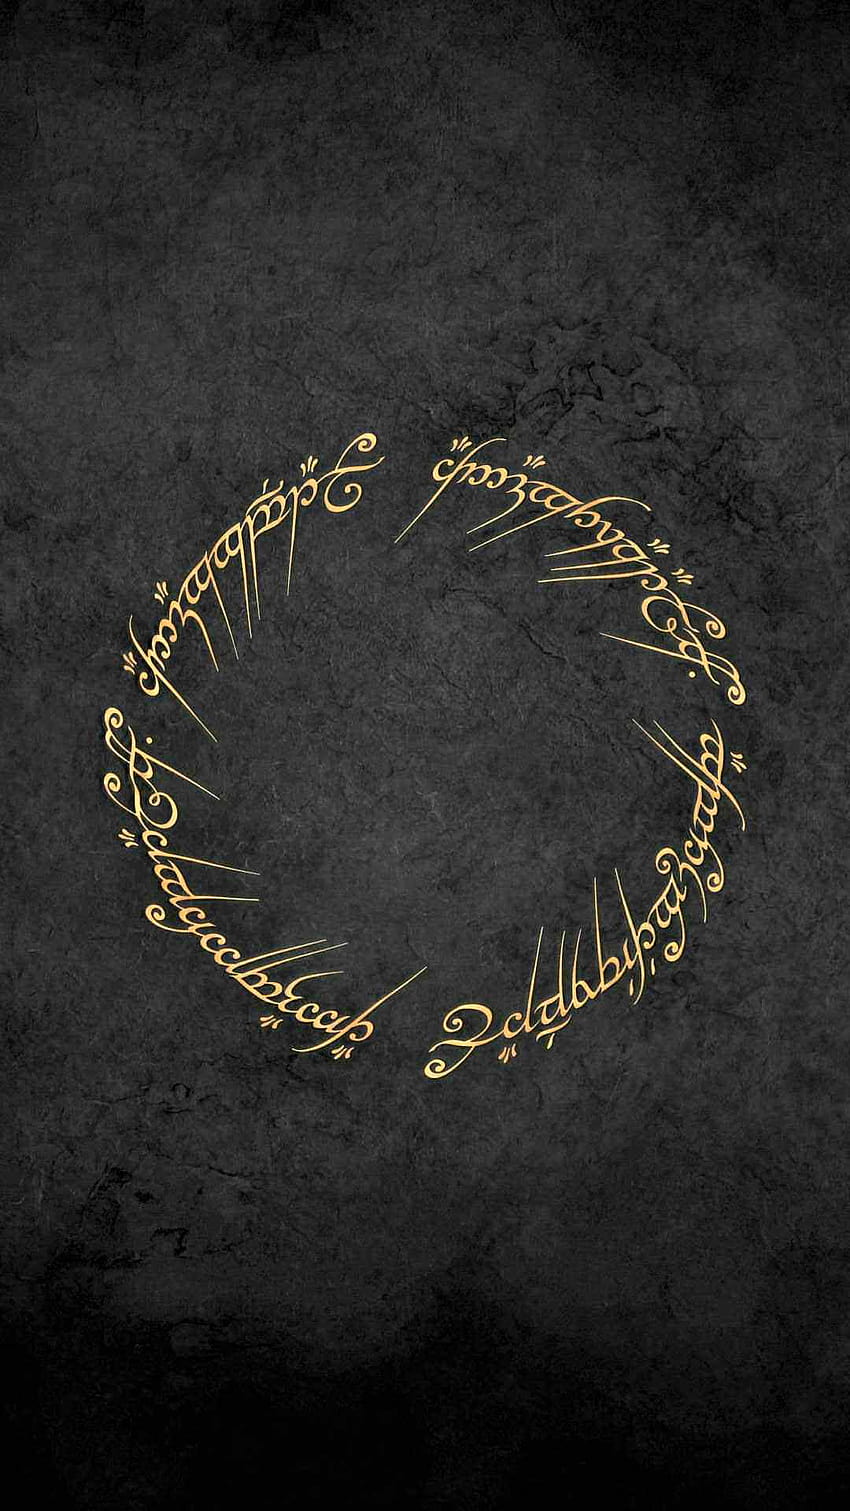 Quality Lord of the Rings Mobile ., the lord of the rings mobile HD phone wallpaper